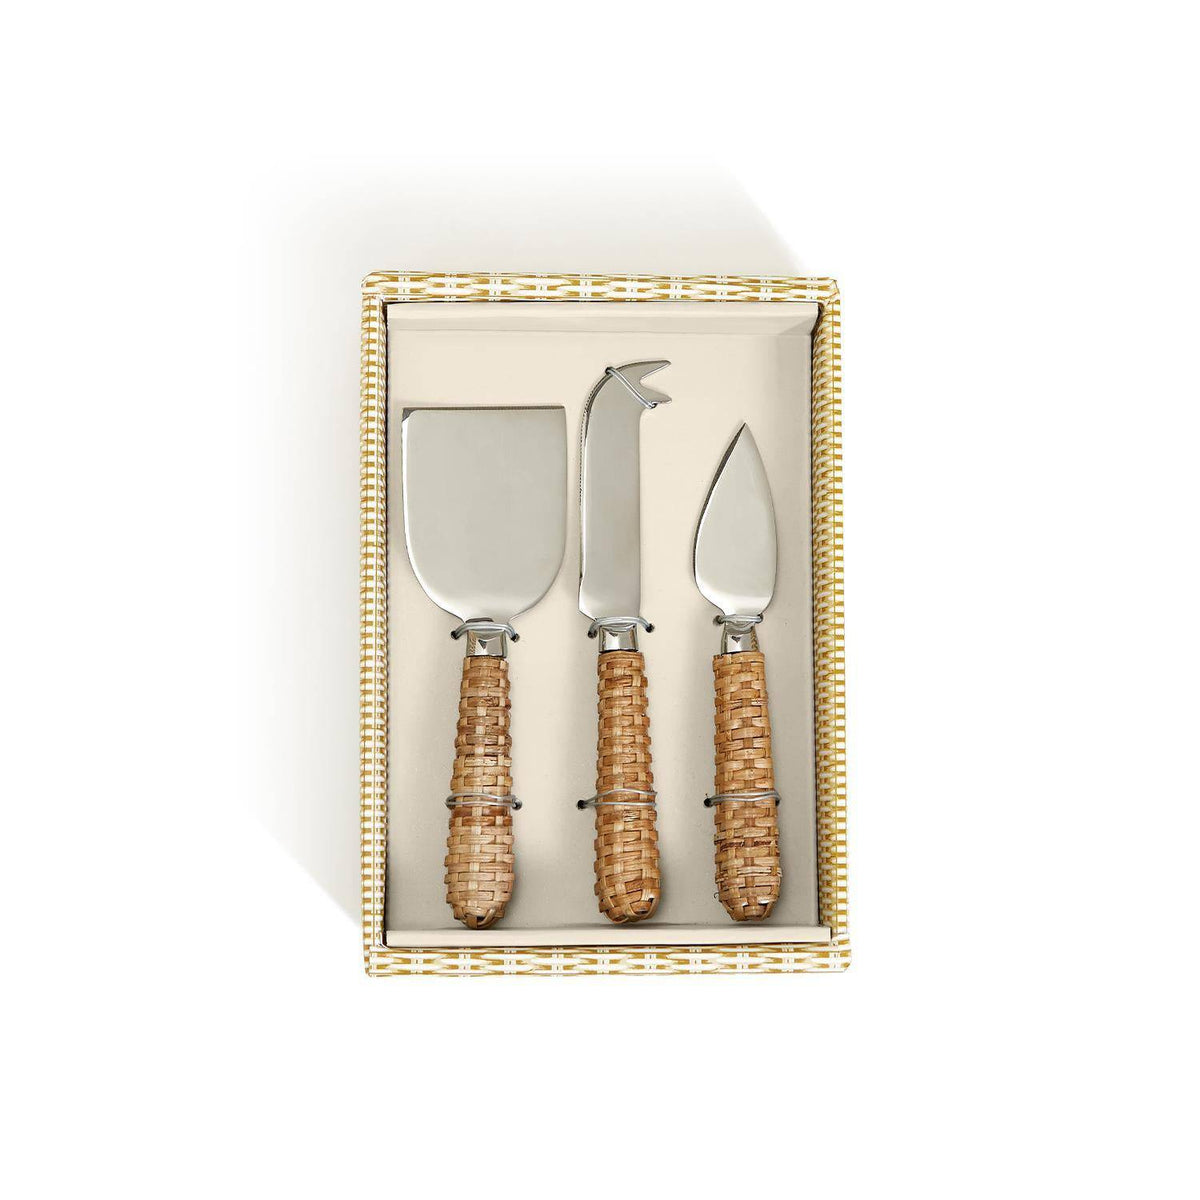 Wicker Weave Set of 3 Cheese Knives - The Preppy Bunny